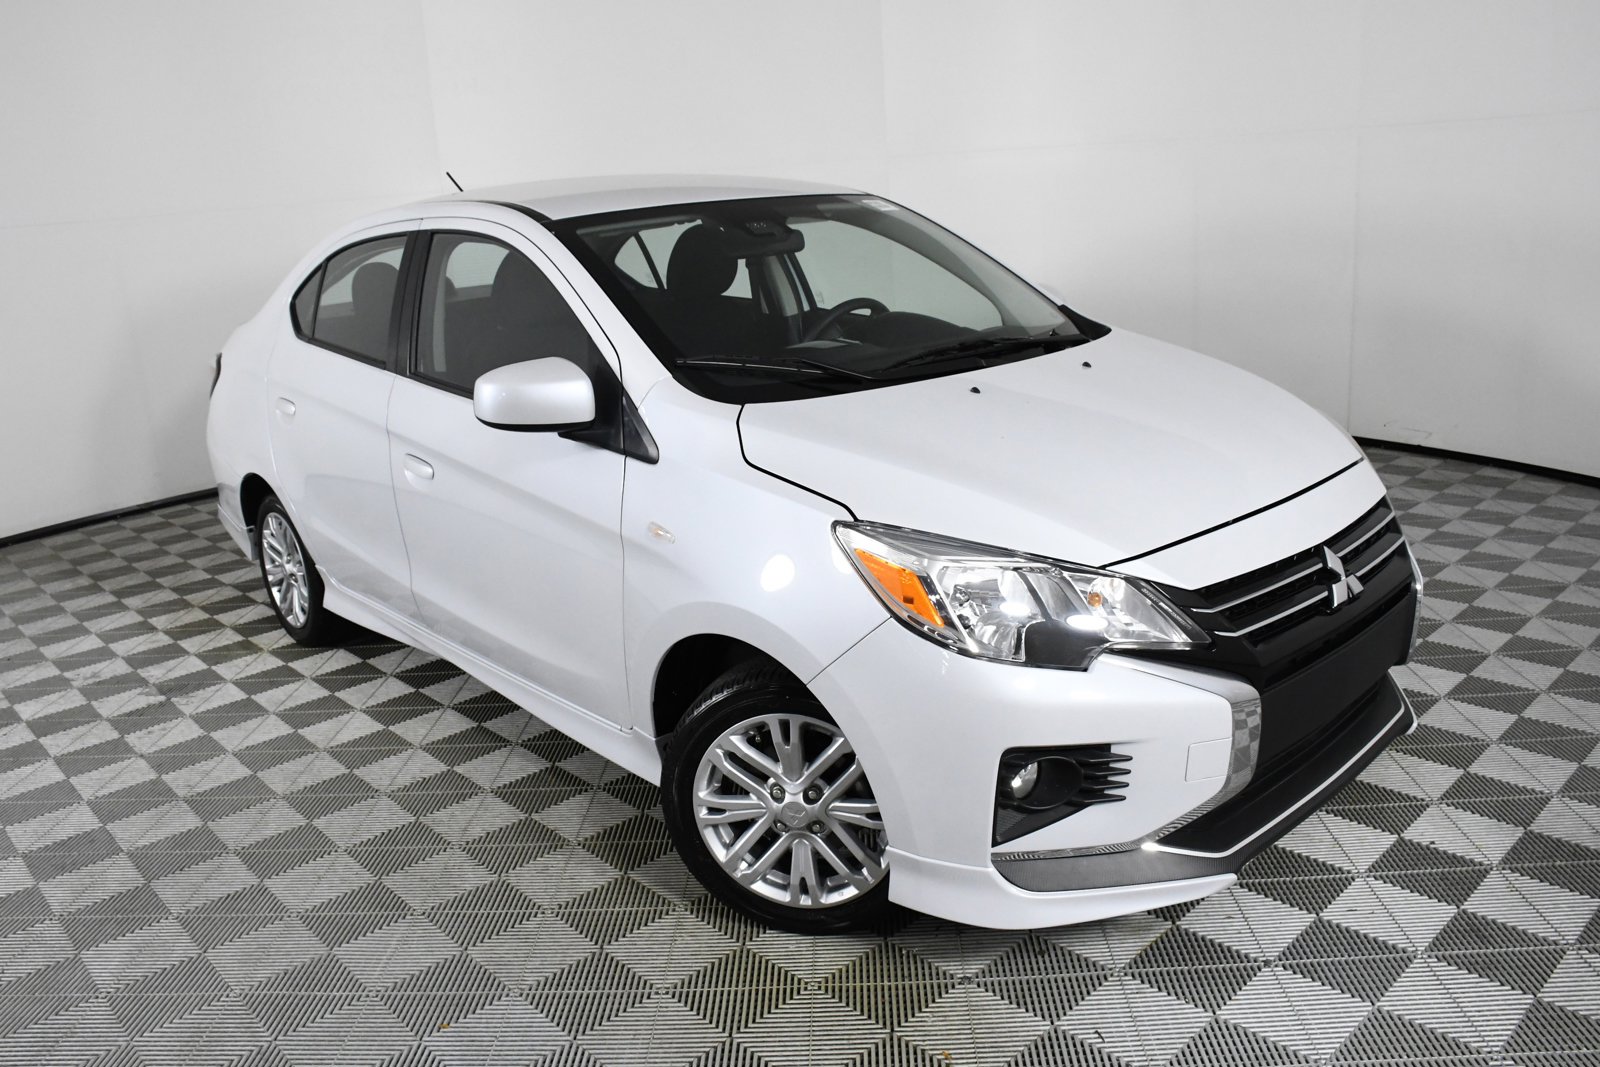 Pre-Owned 2021 Mitsubishi Mirage G4 Carbonite Edition 4dr Car in Palmetto  Bay #MHF04095 | HGreg Nissan Kendall